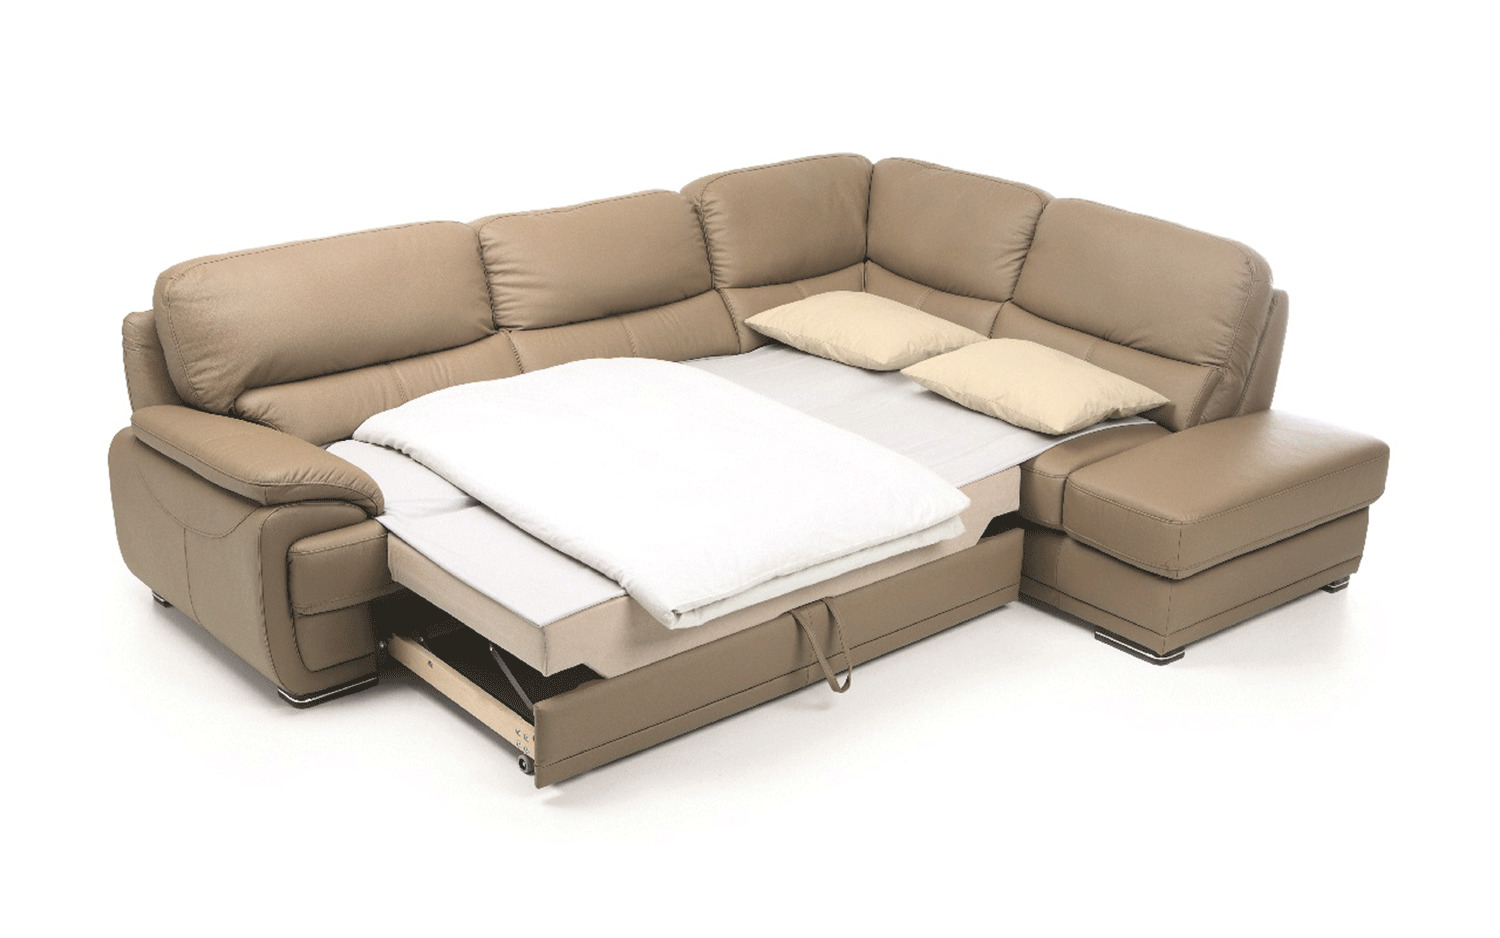 leather sectional sleeper sofa with storage